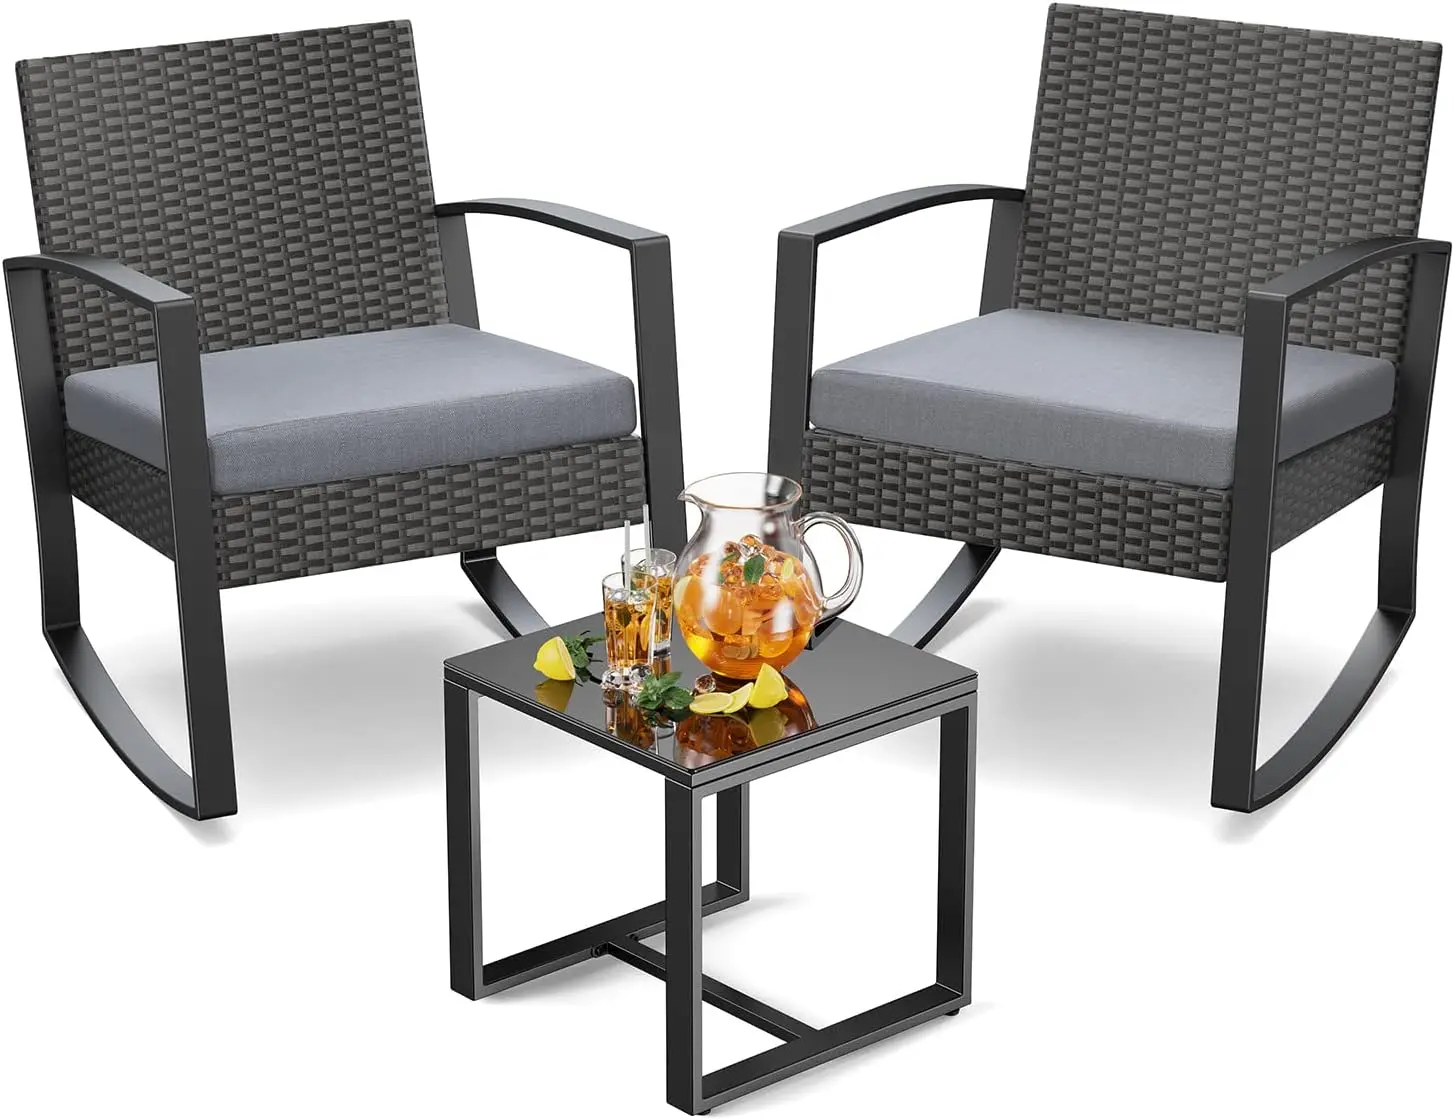 

3 Piece Wicker Patio Furniture Set, Outdoor Rocking Chairs, Outdoor Furniture with Table & Cushions